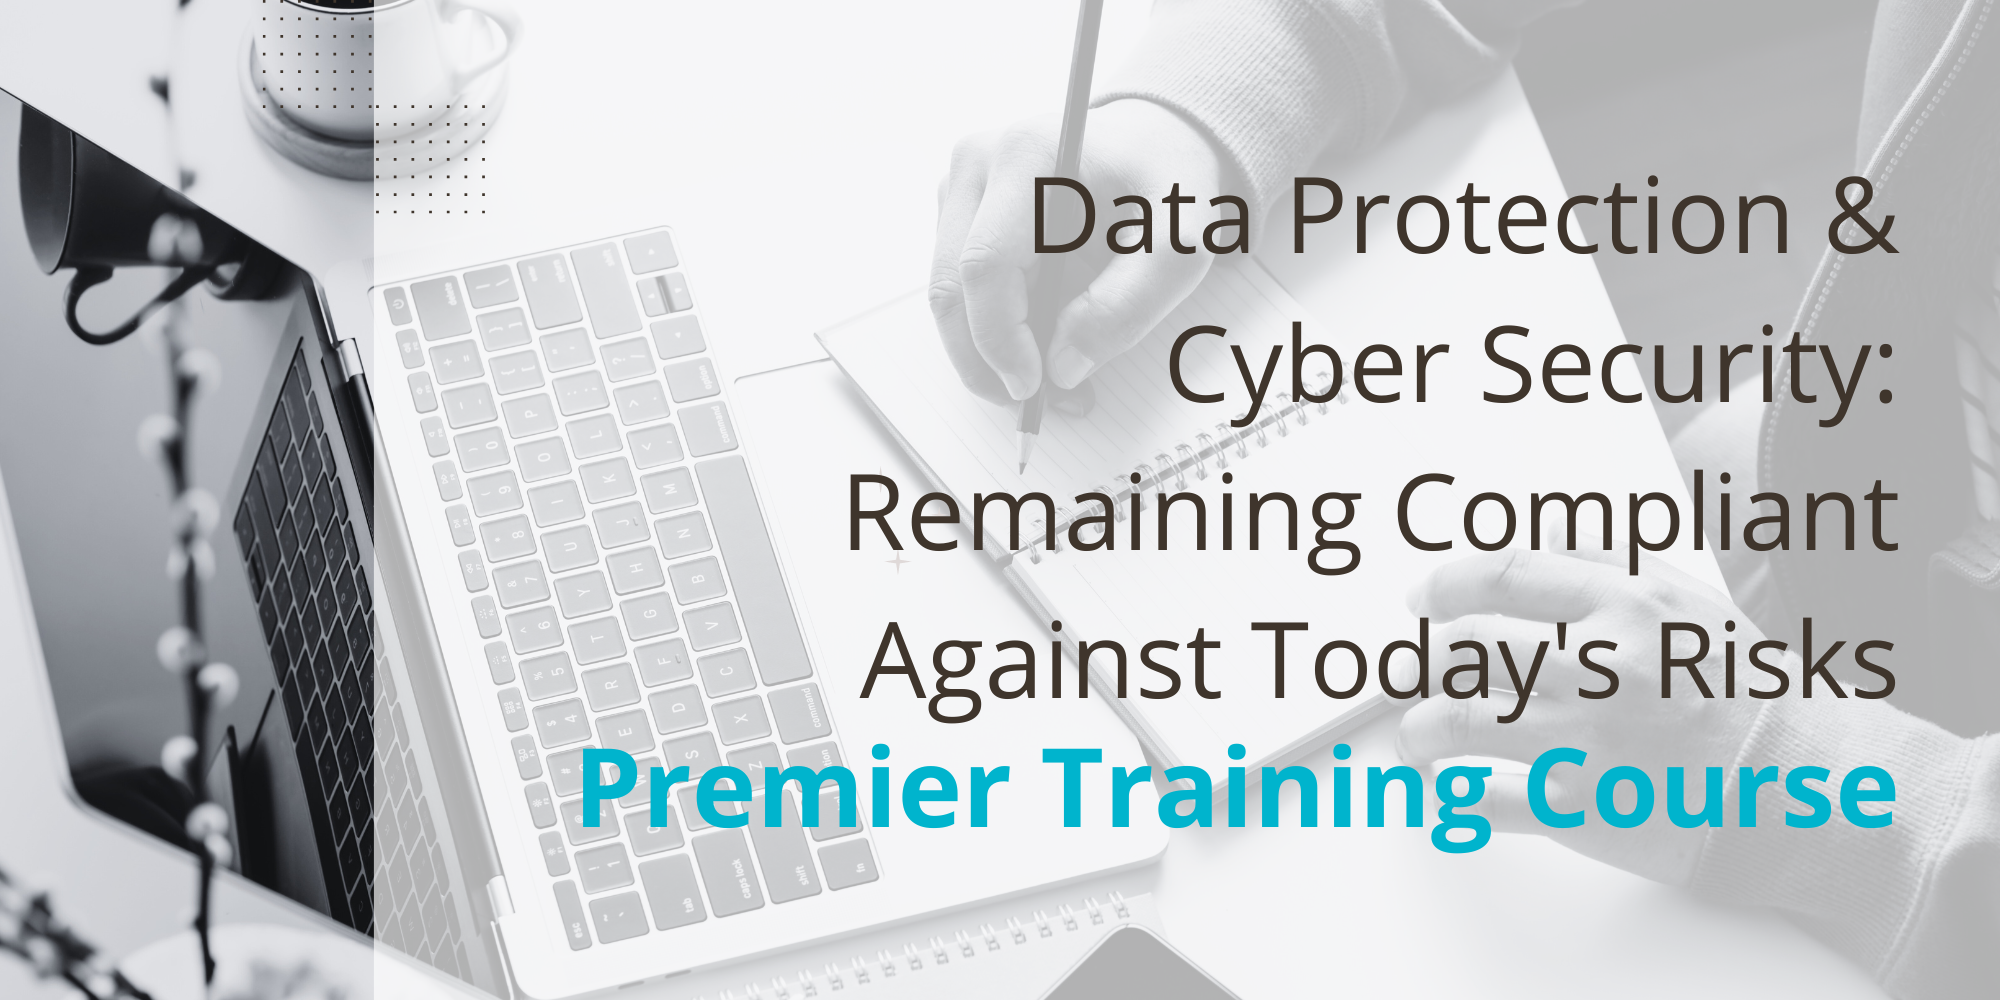 Data Protection & Cyber Security: Remaining Compliant Against Today's Risks